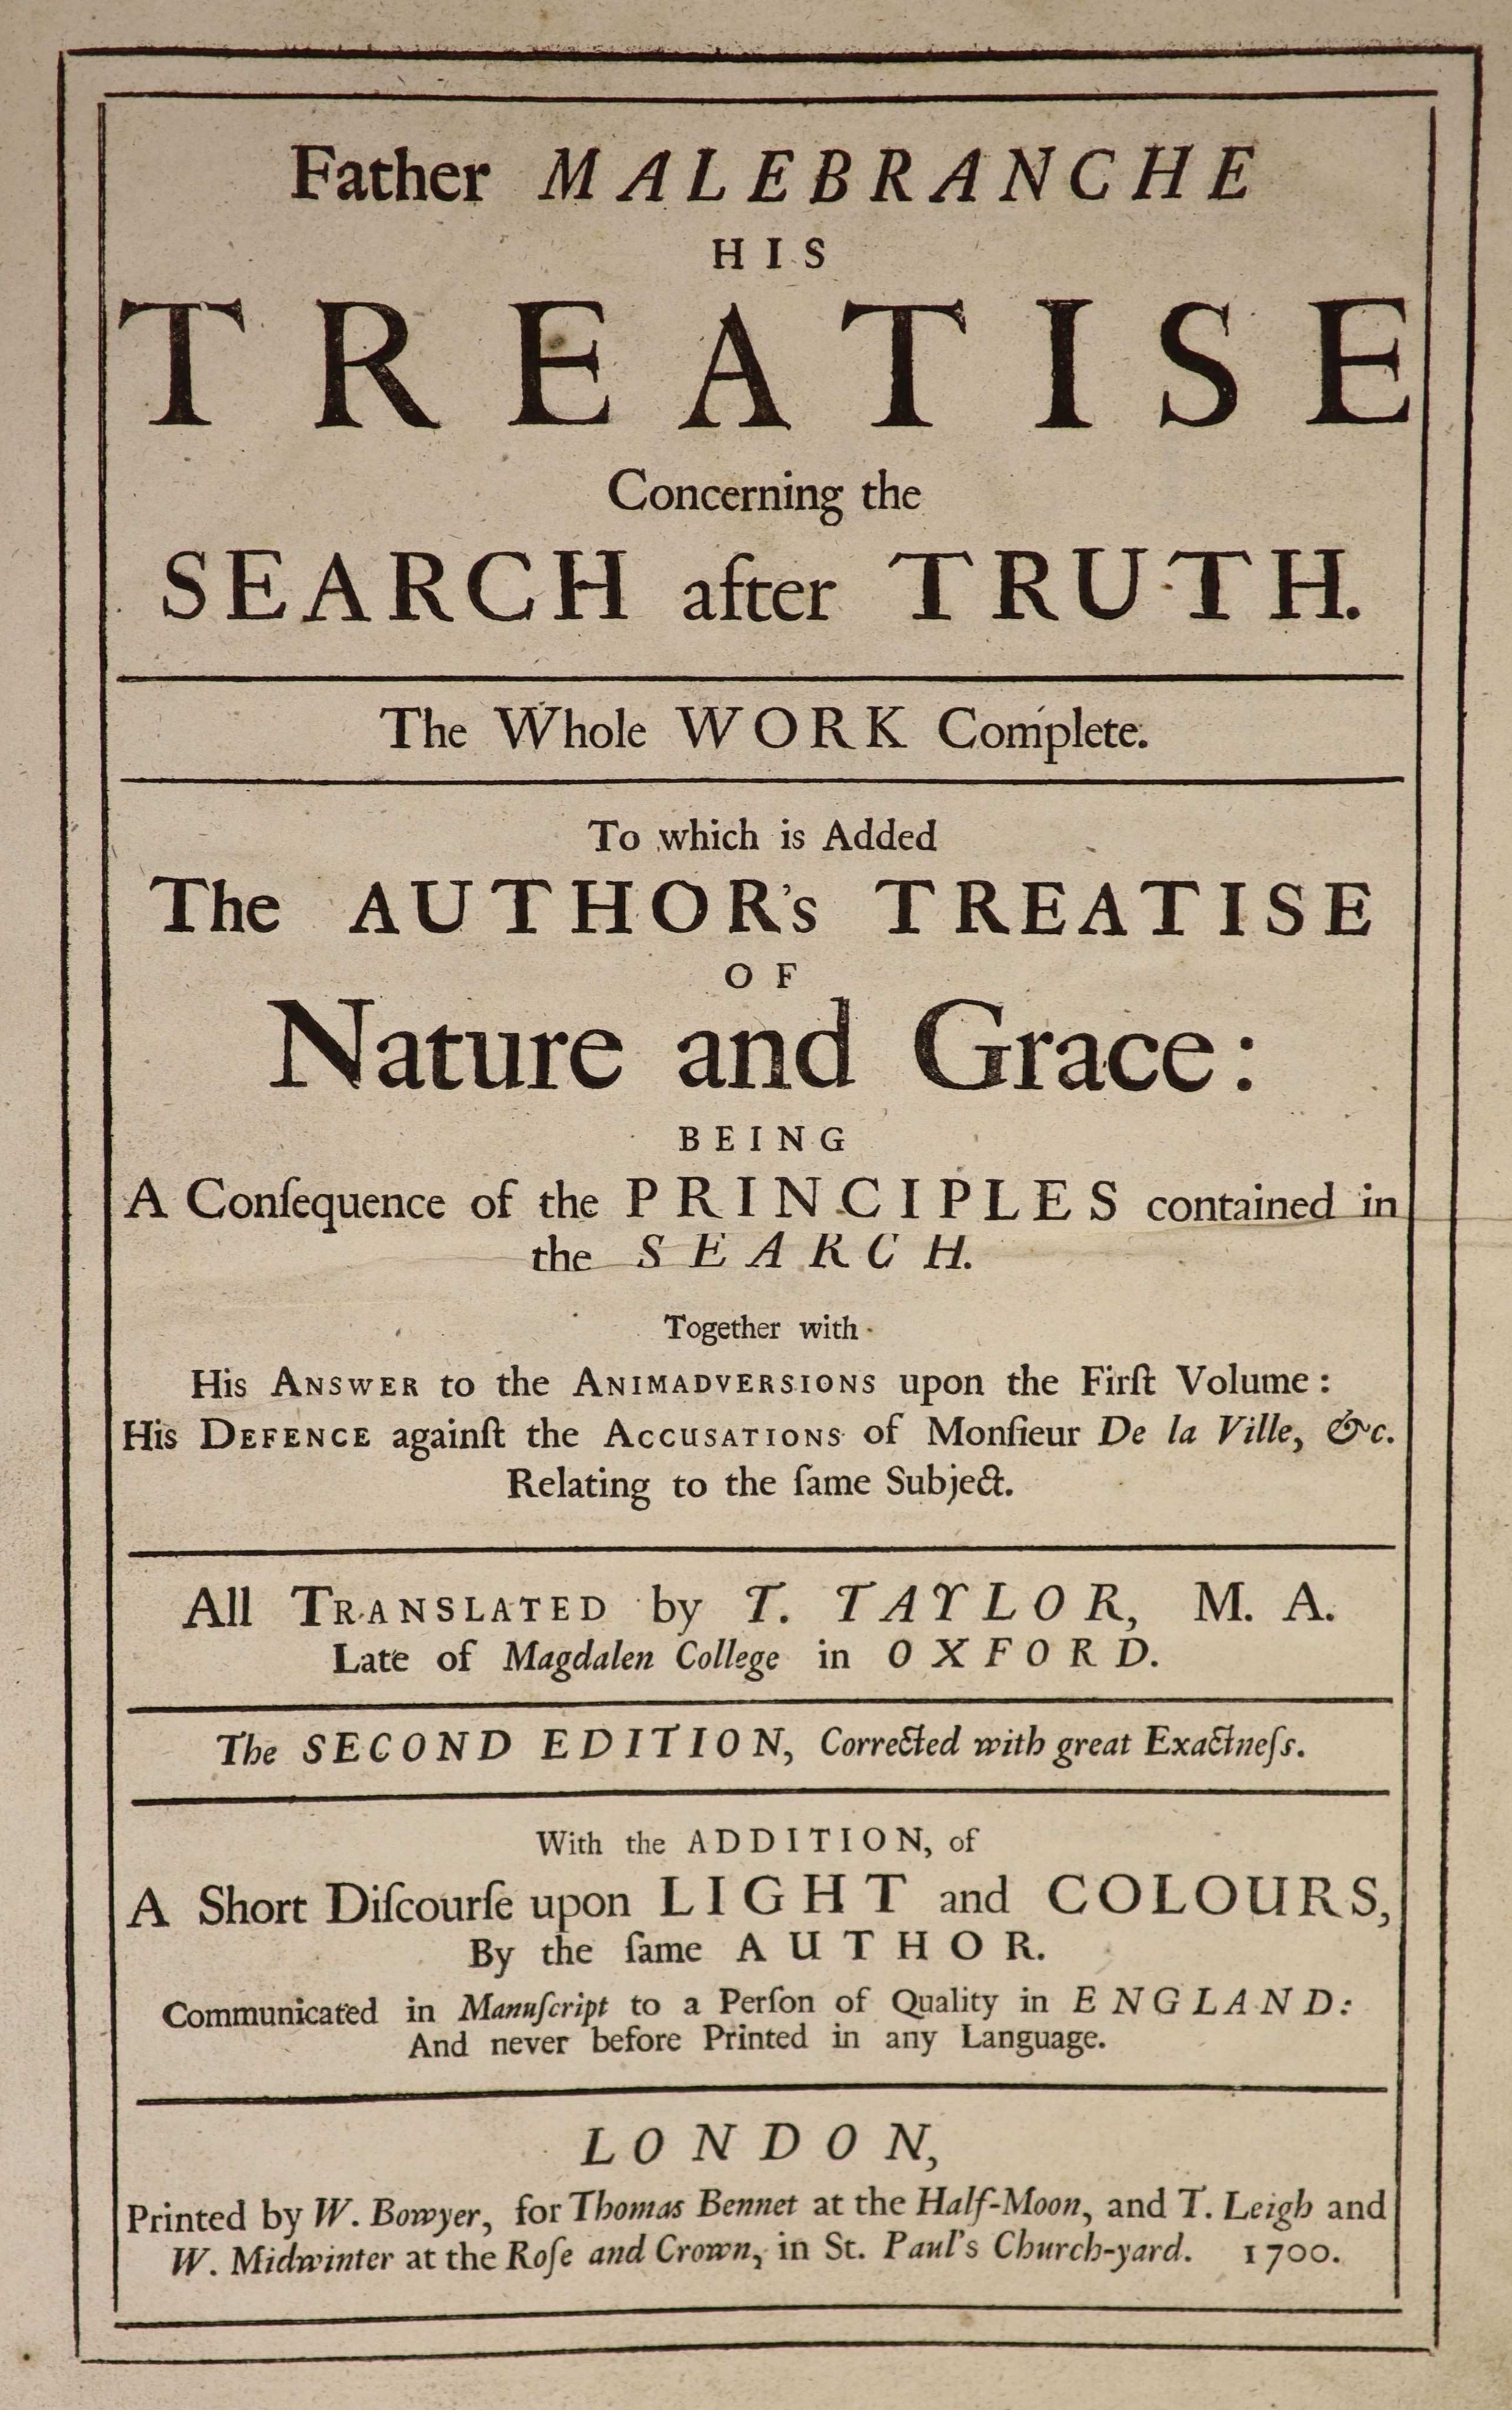 Malebranche, Nicholas de - His Treatise concerning the Search after Truth ... to which is added the author's Treatise of Nature and Grace ... all translated by T. Taylor ...